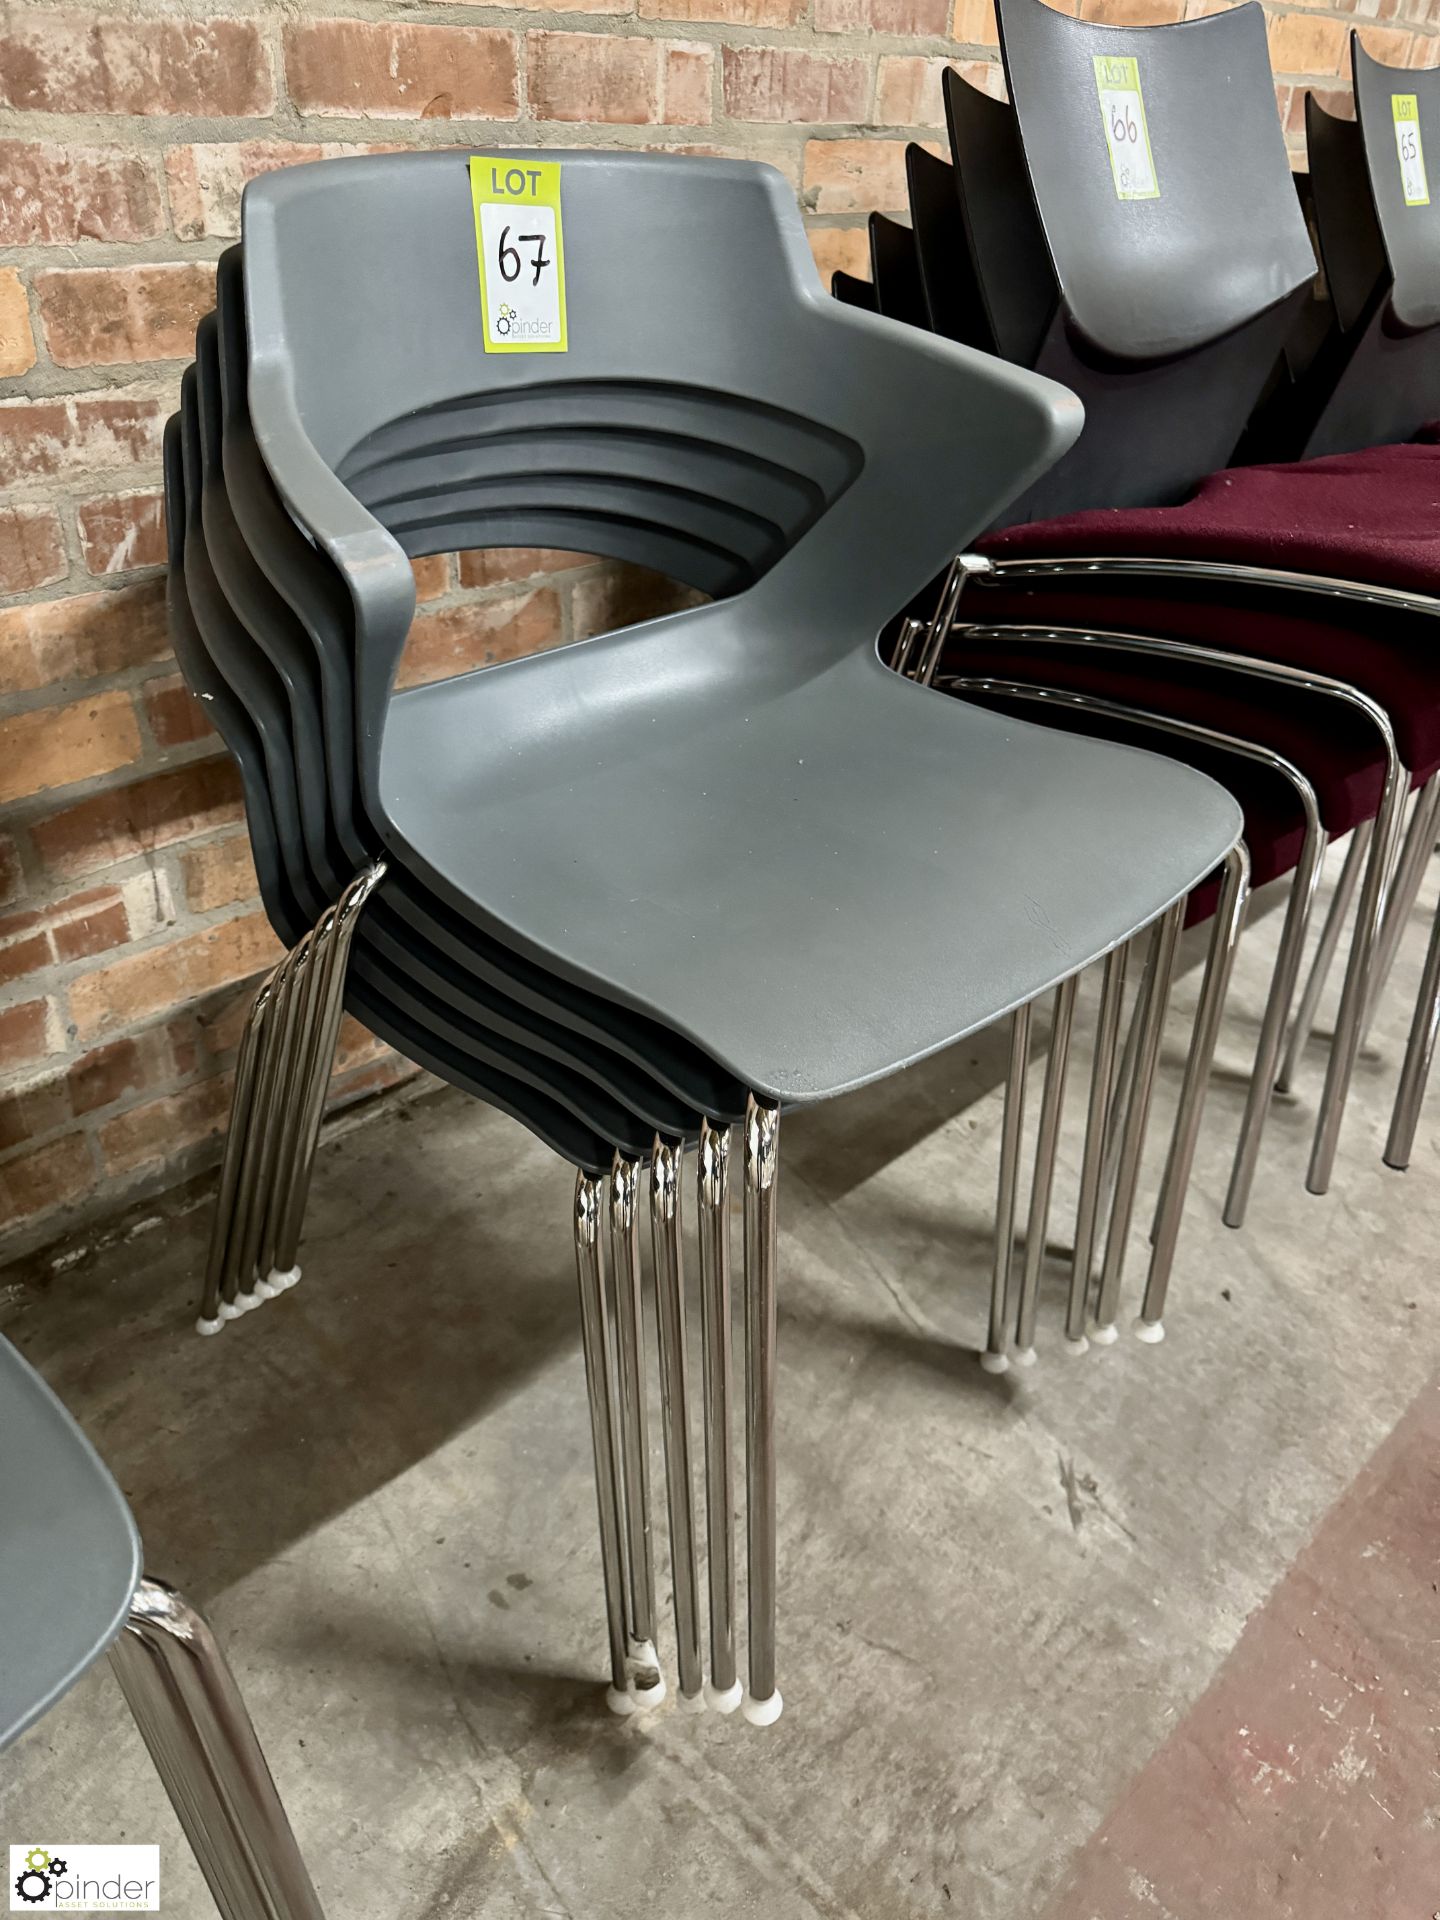 5 chrome framed stacking Meeting Chairs - Image 2 of 3